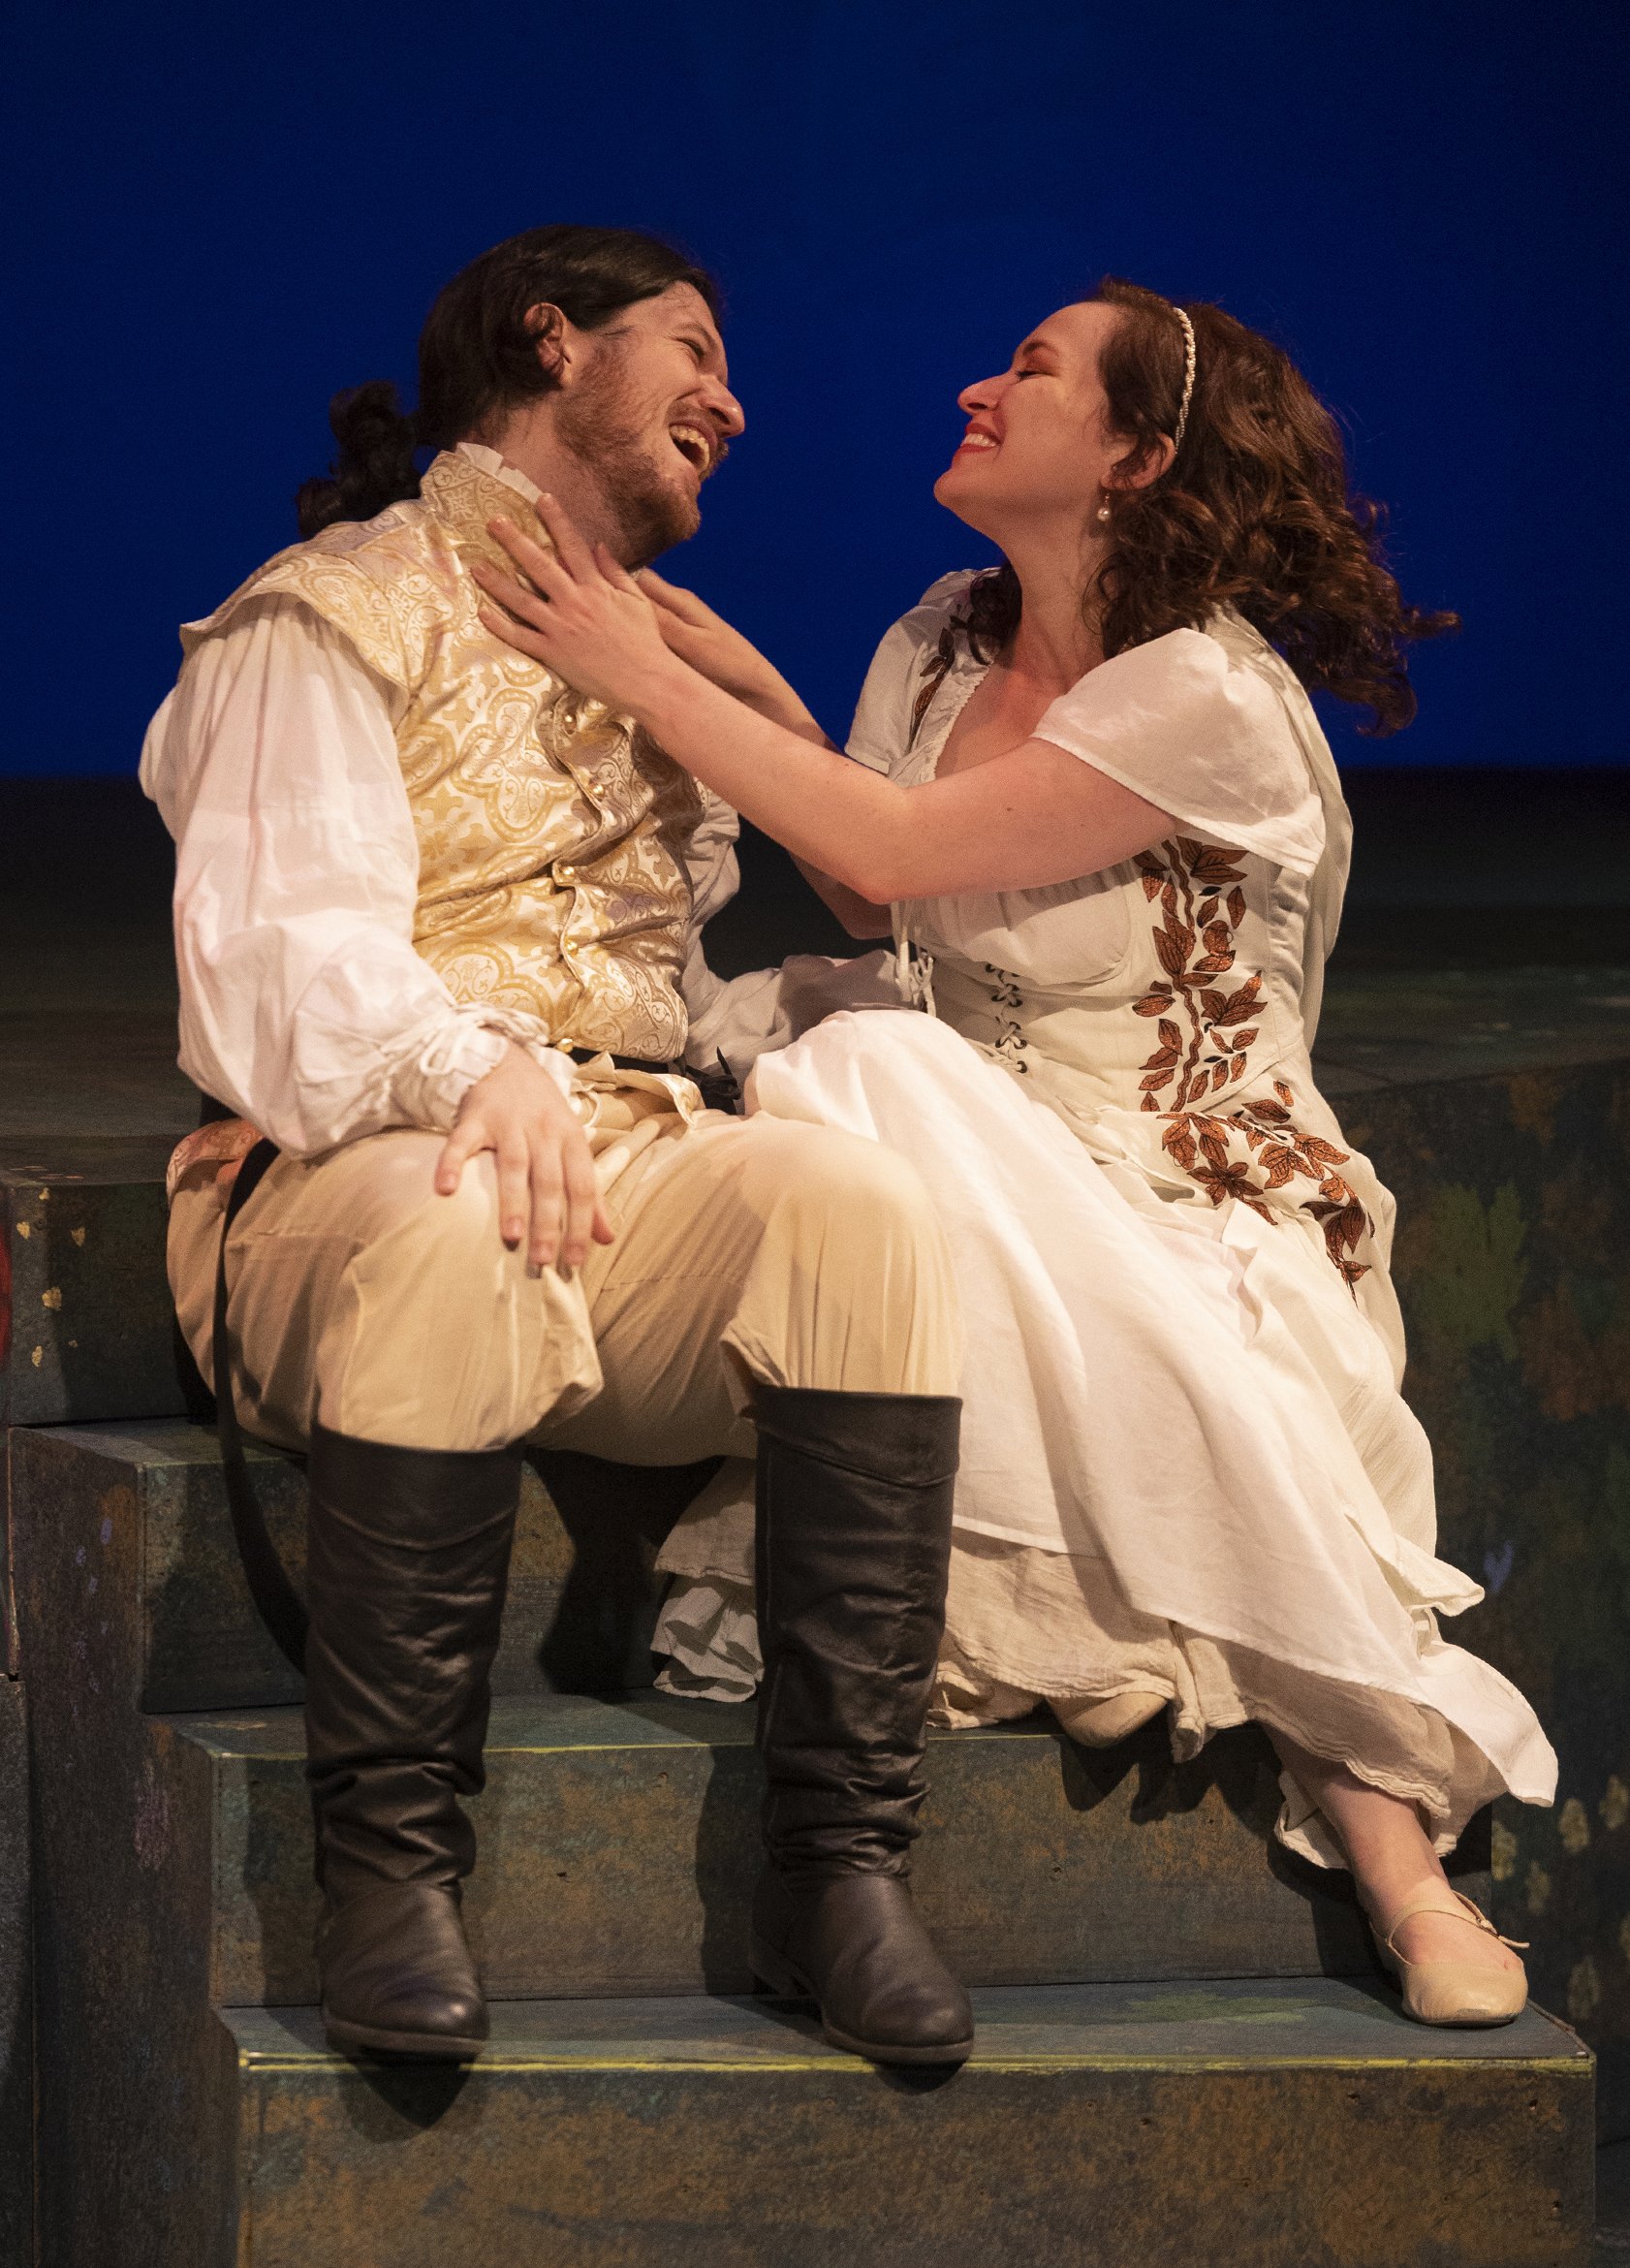 Zachary Austin as Lysander and Bryn Booth as Hermia. Photo by Tim Fuller.